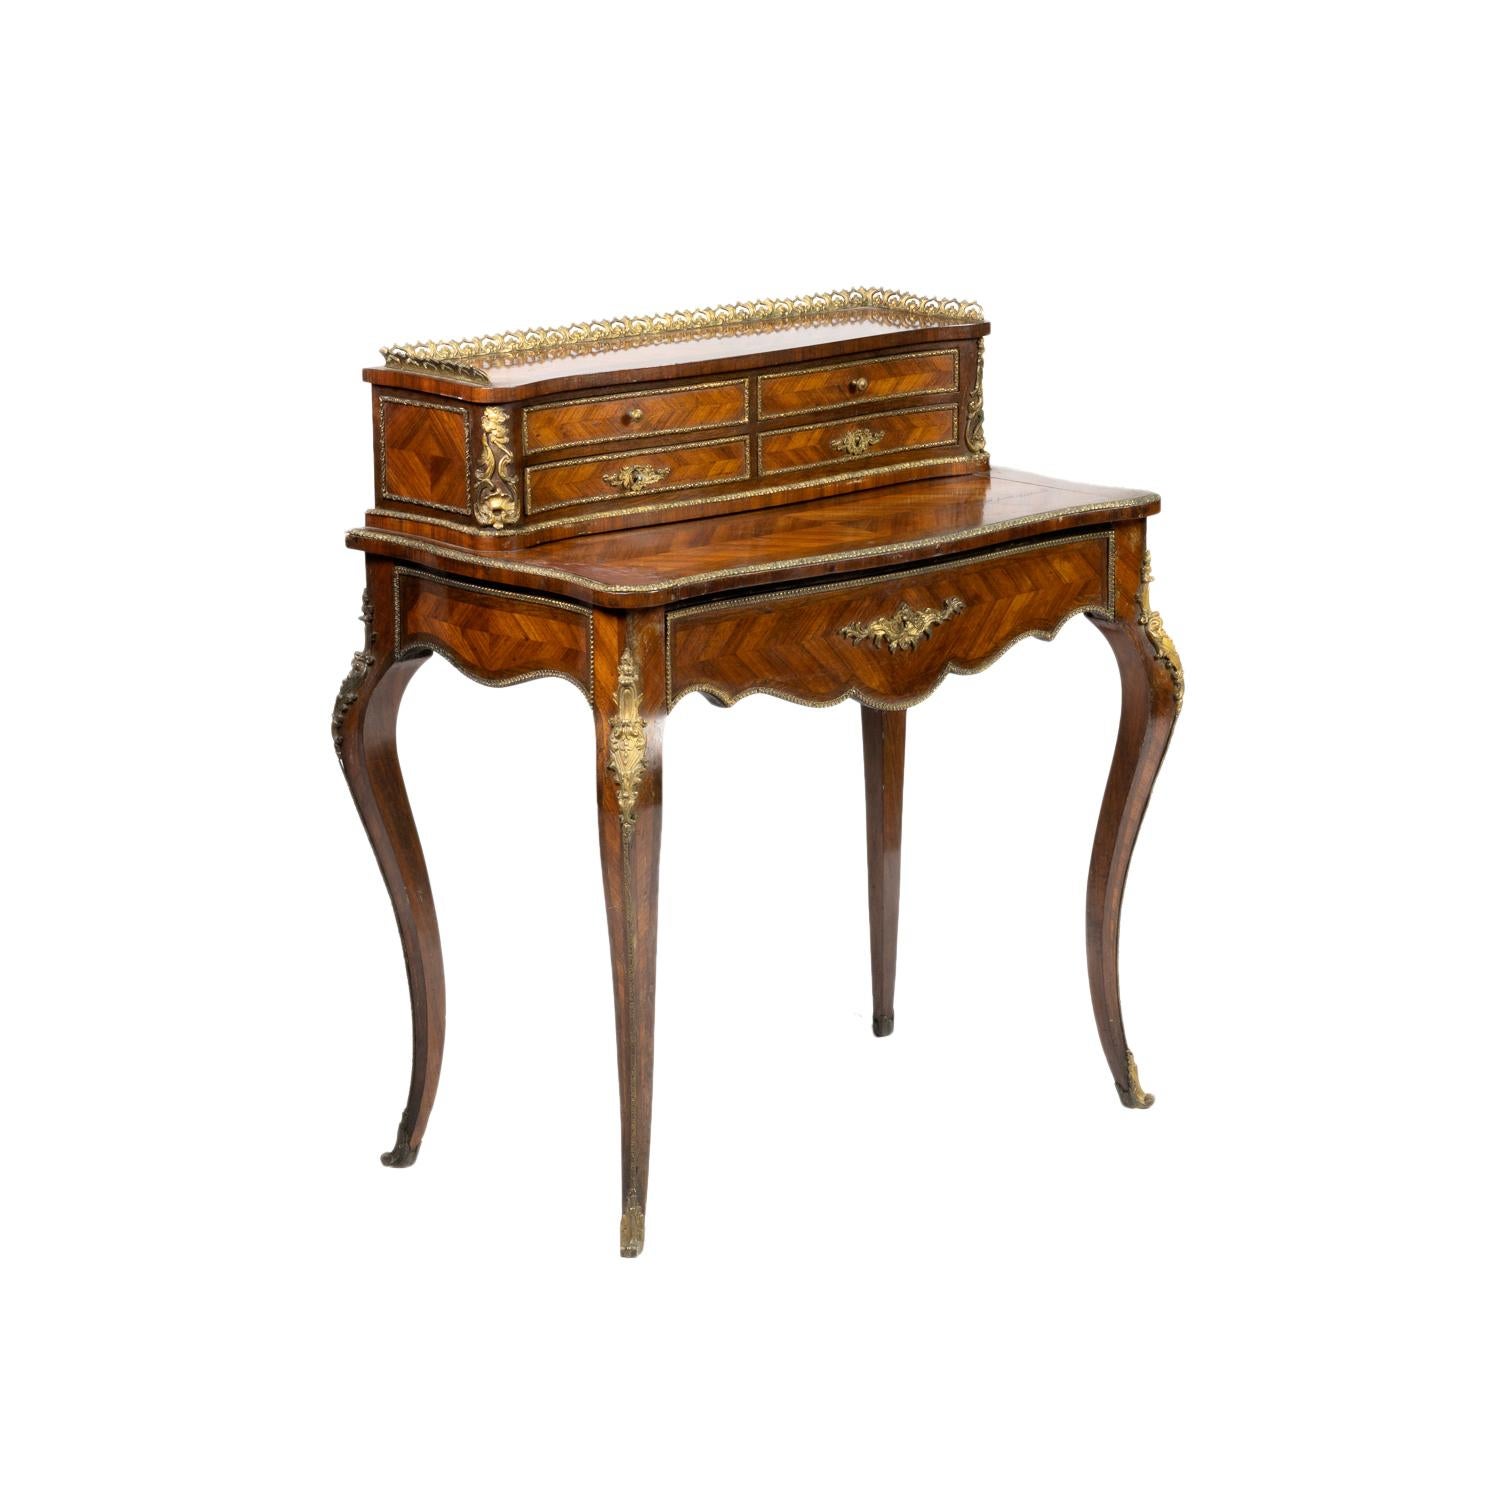 A rare Bonheur Du Jour with gilt brass mounts and exquisite marquetry inlay with French Sèvres Style Porcelain and Ormolu Mounted.
A Louis XVI Style 19th Century piece with four upper draws and one large lower draw with golden rails raised on